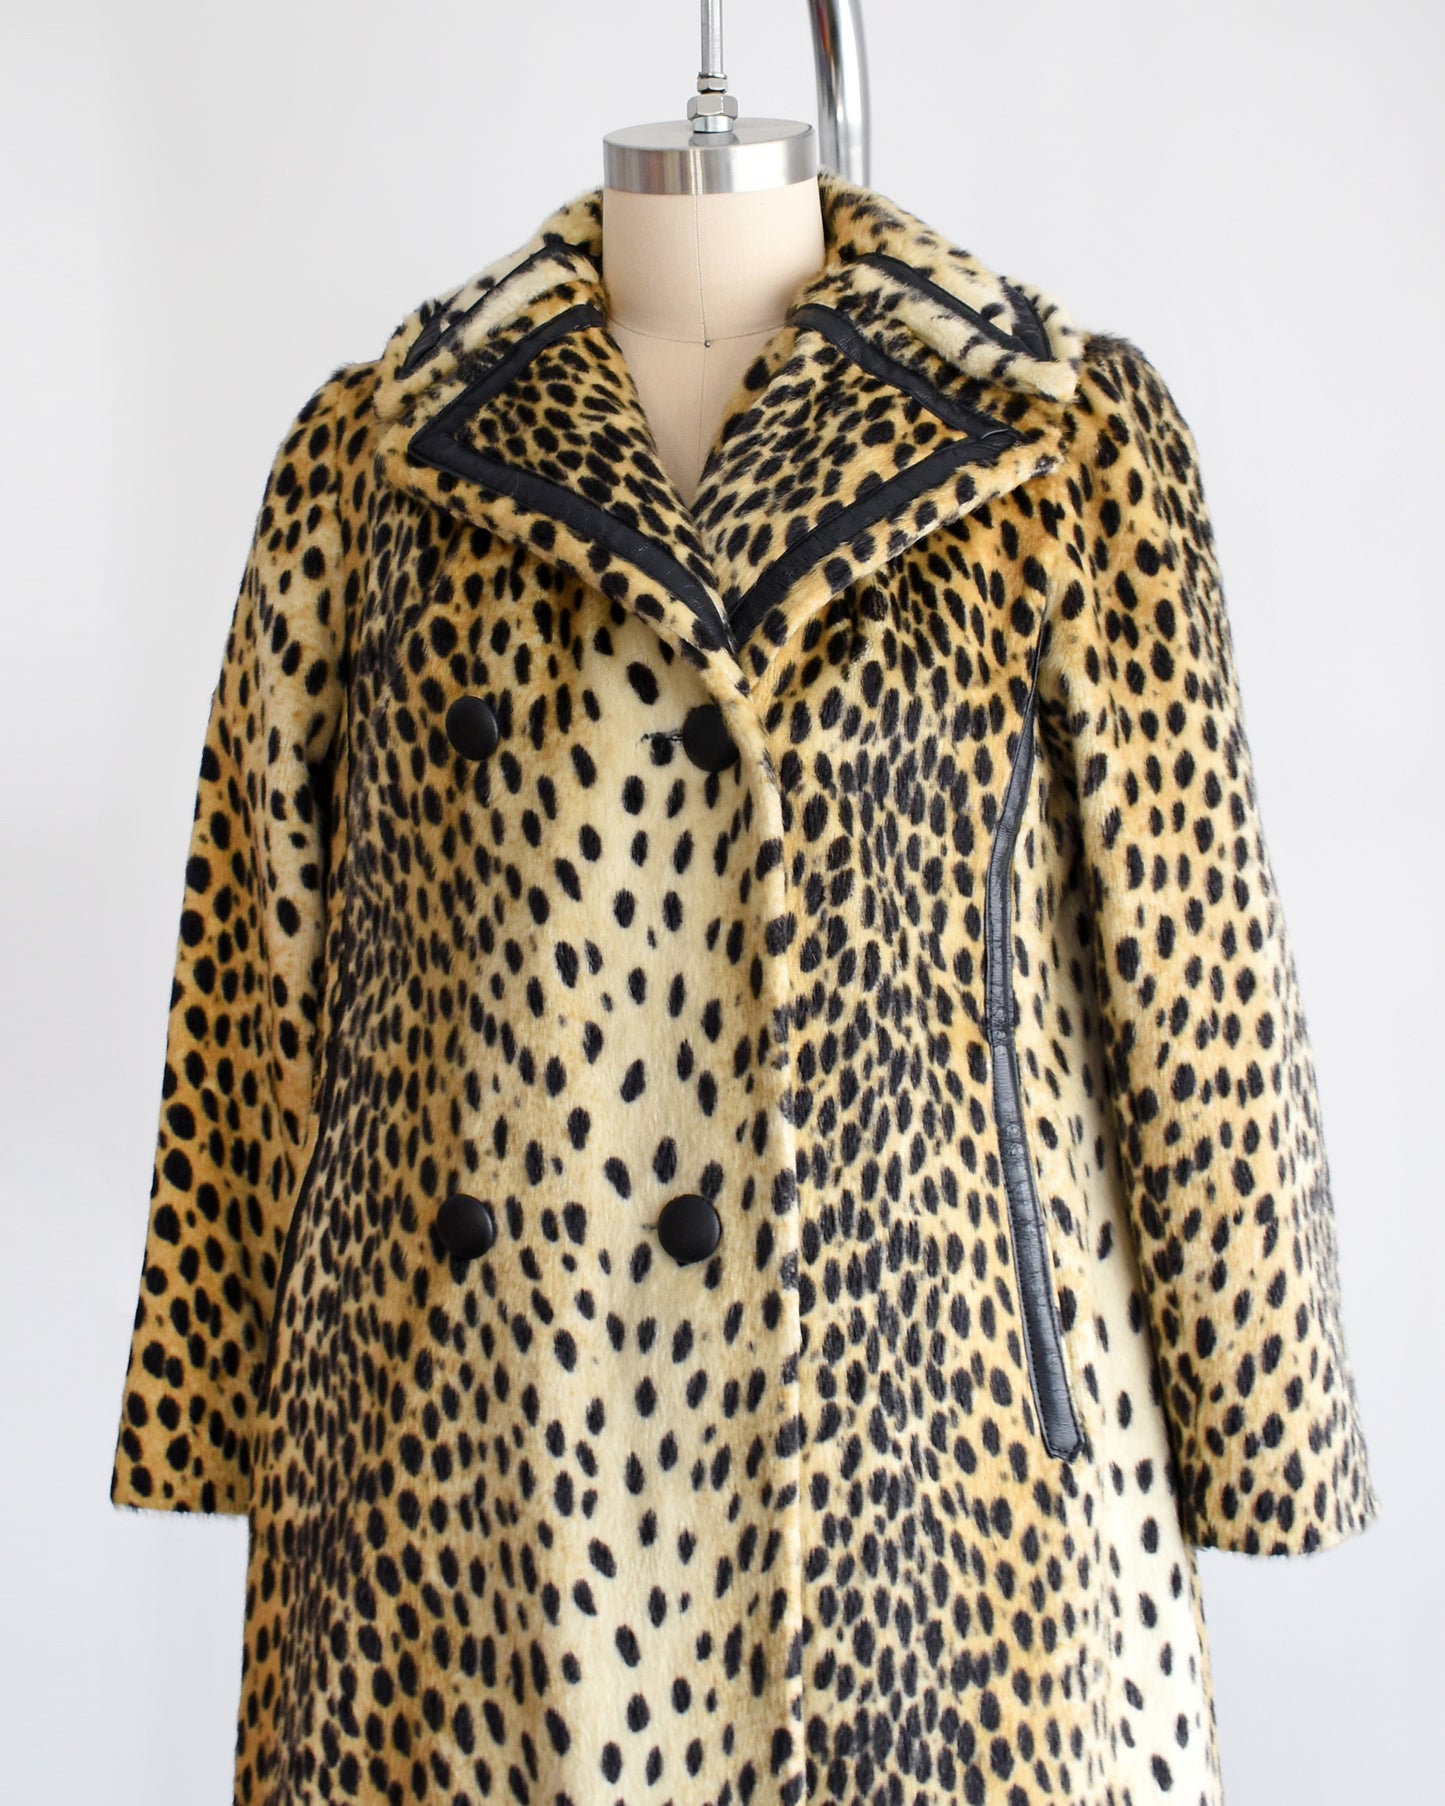 Side front view of a faux fur cheetah print coat features golden faux fur with black spots and black faux leather trim